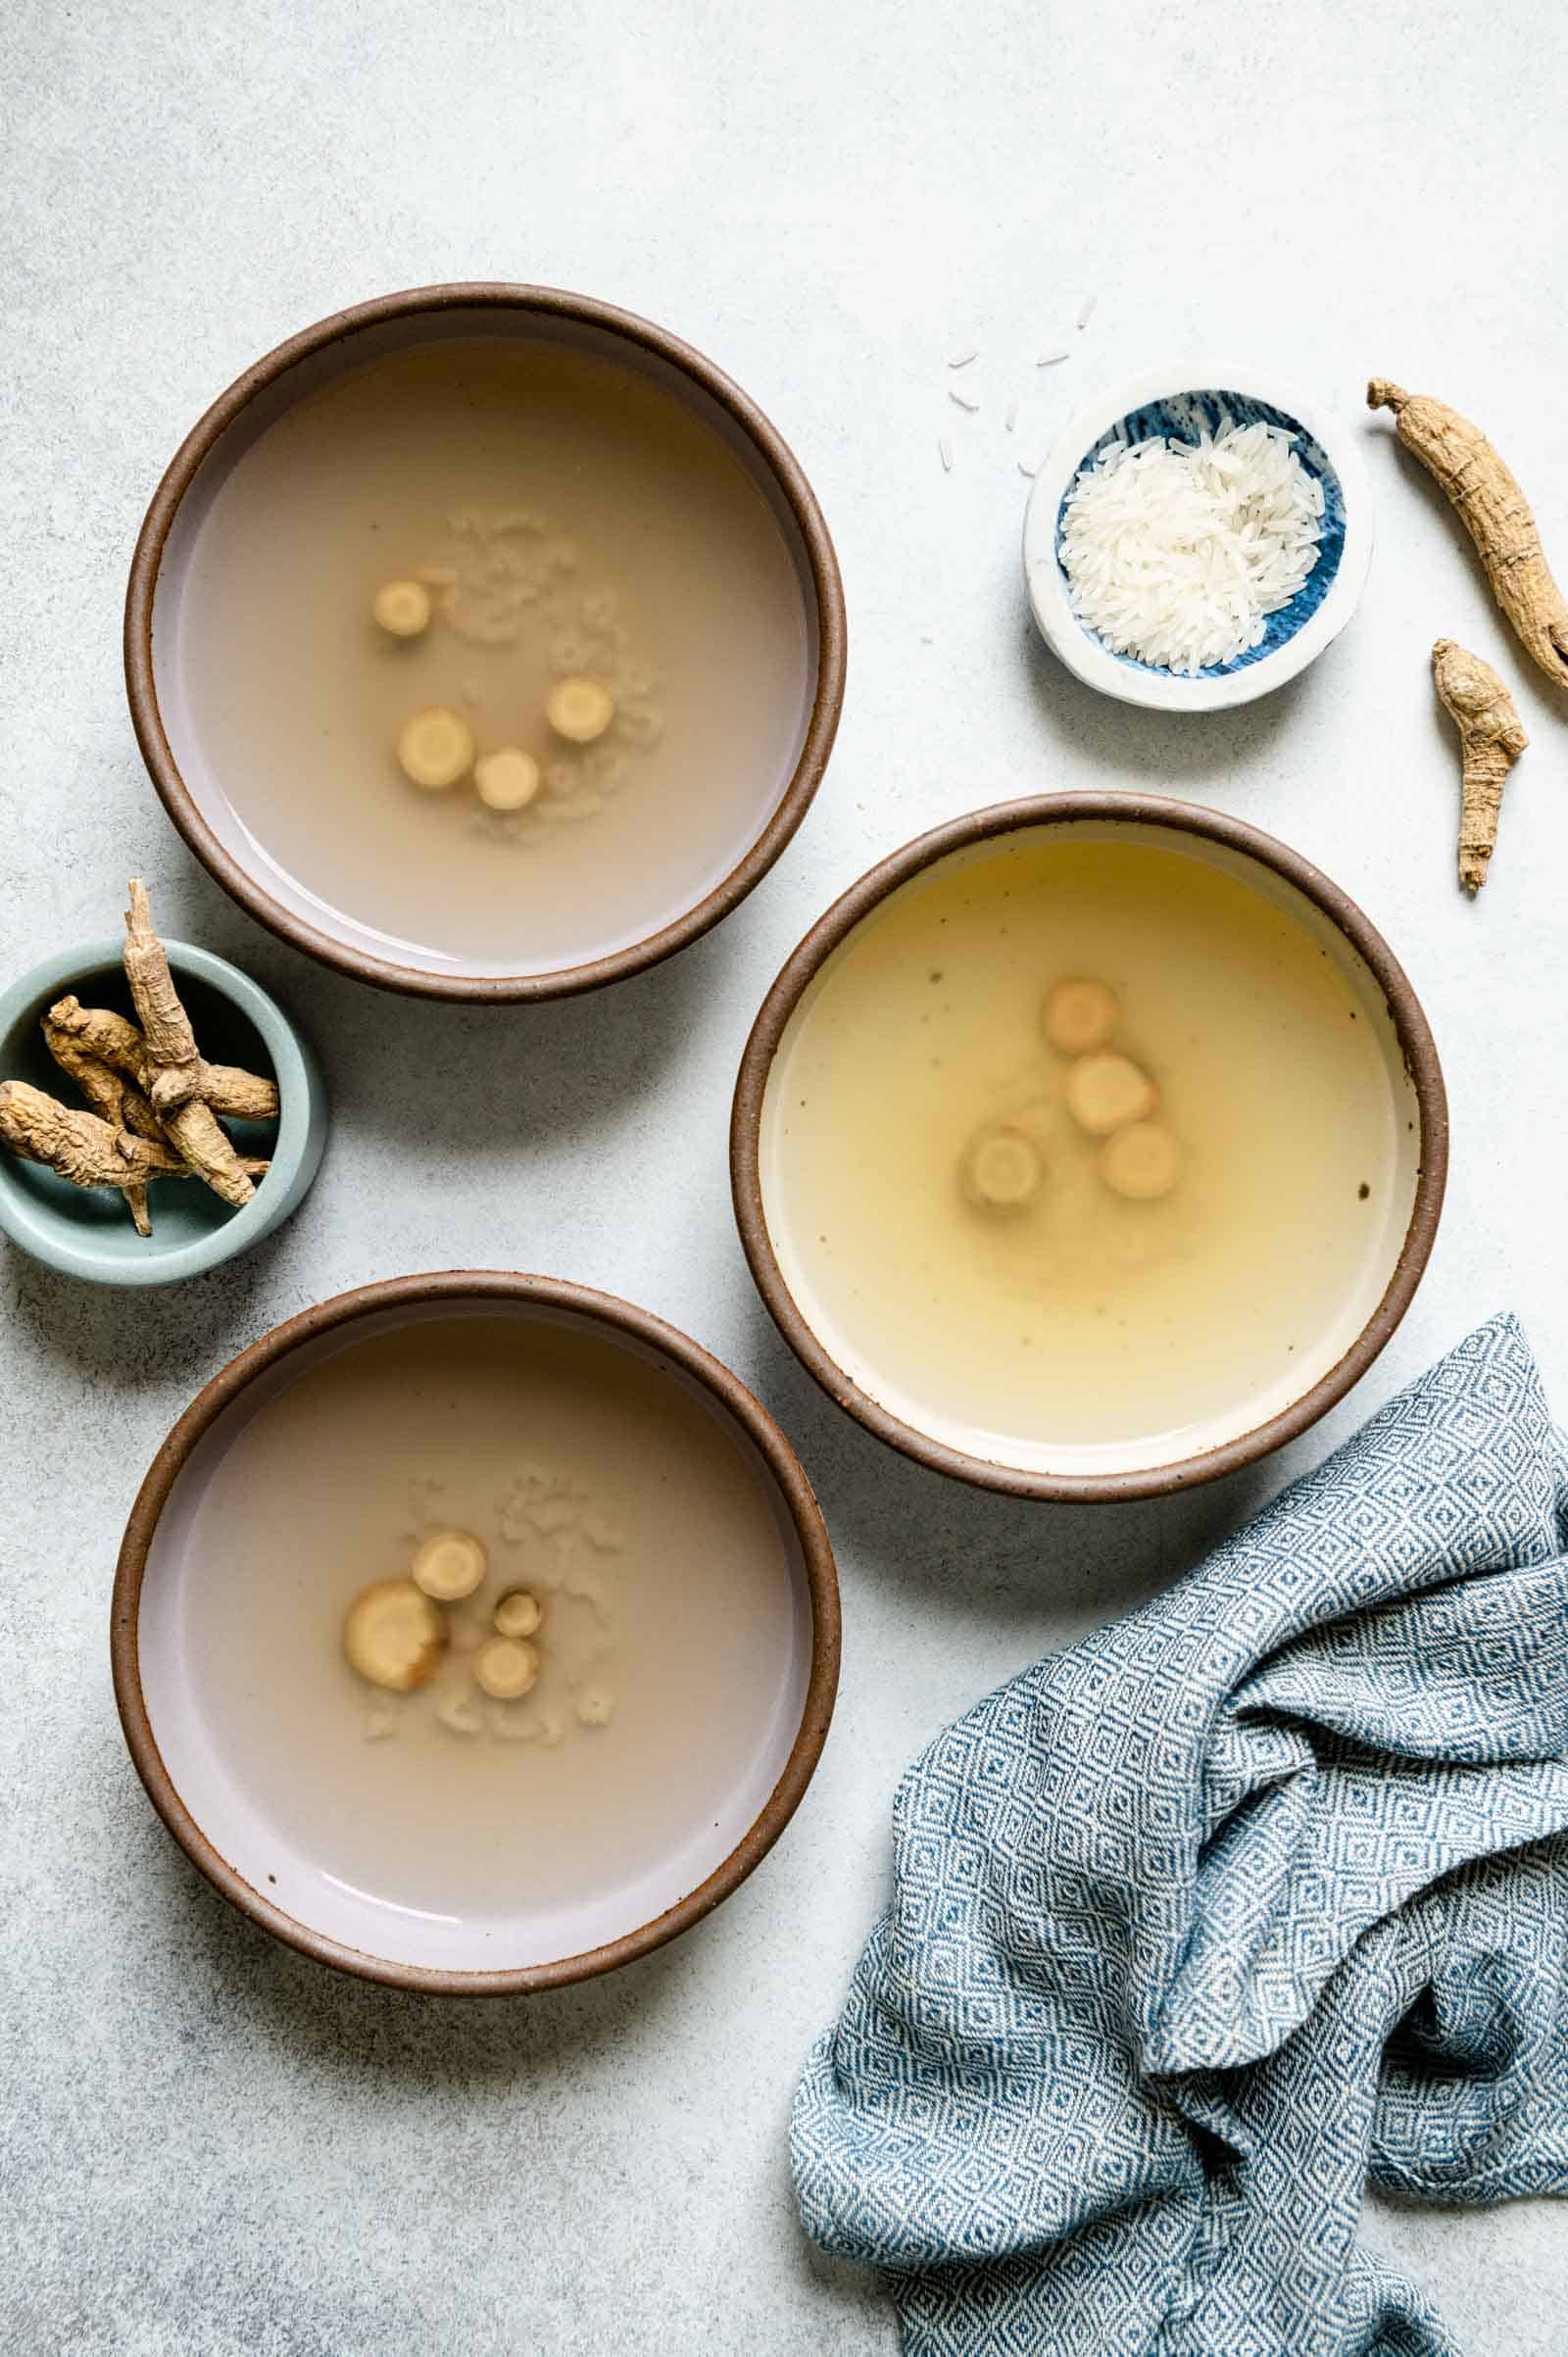 Ginseng root and tea in bowls